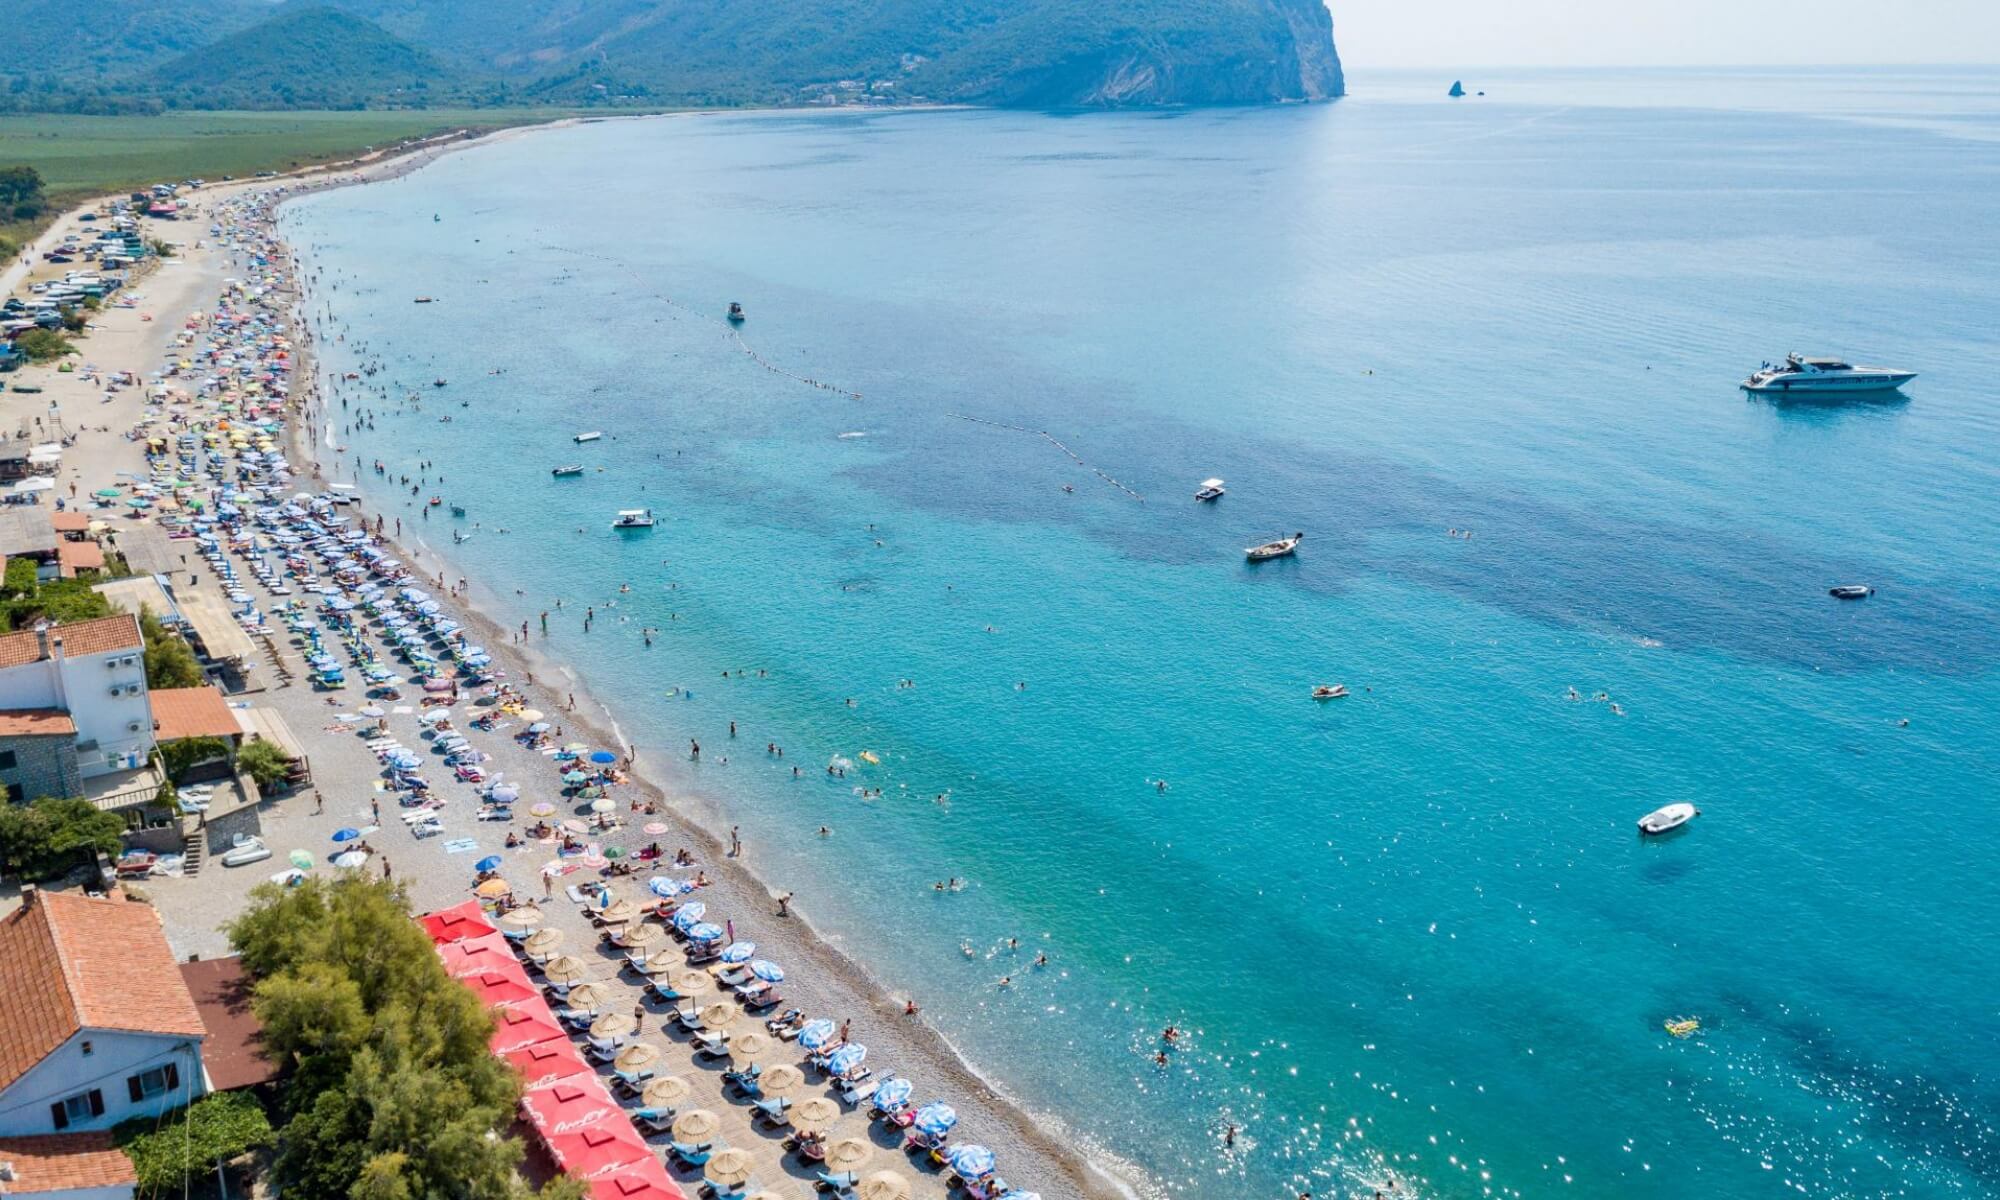 Budva listed as Number One Holiday Destination for Summer 2019 by Macedonian Portal Radar.mk 3